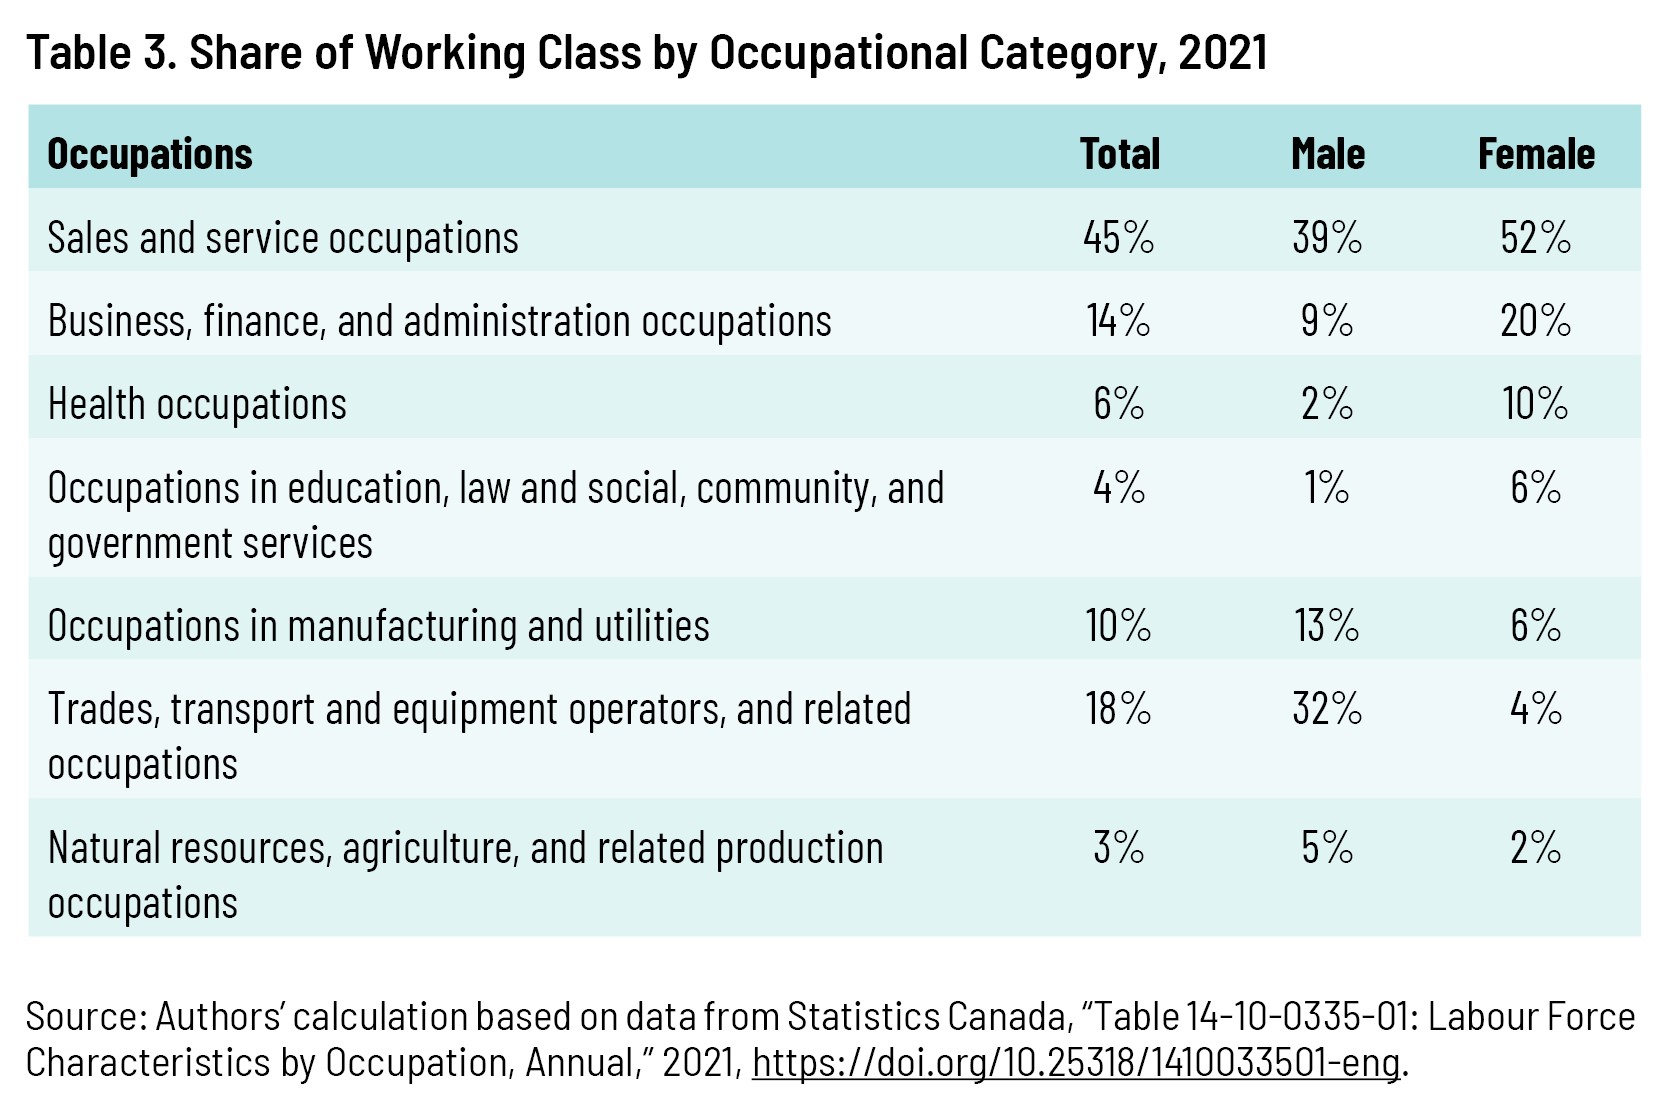 Table 3. Share of Working Class by Occupational Category, 2021